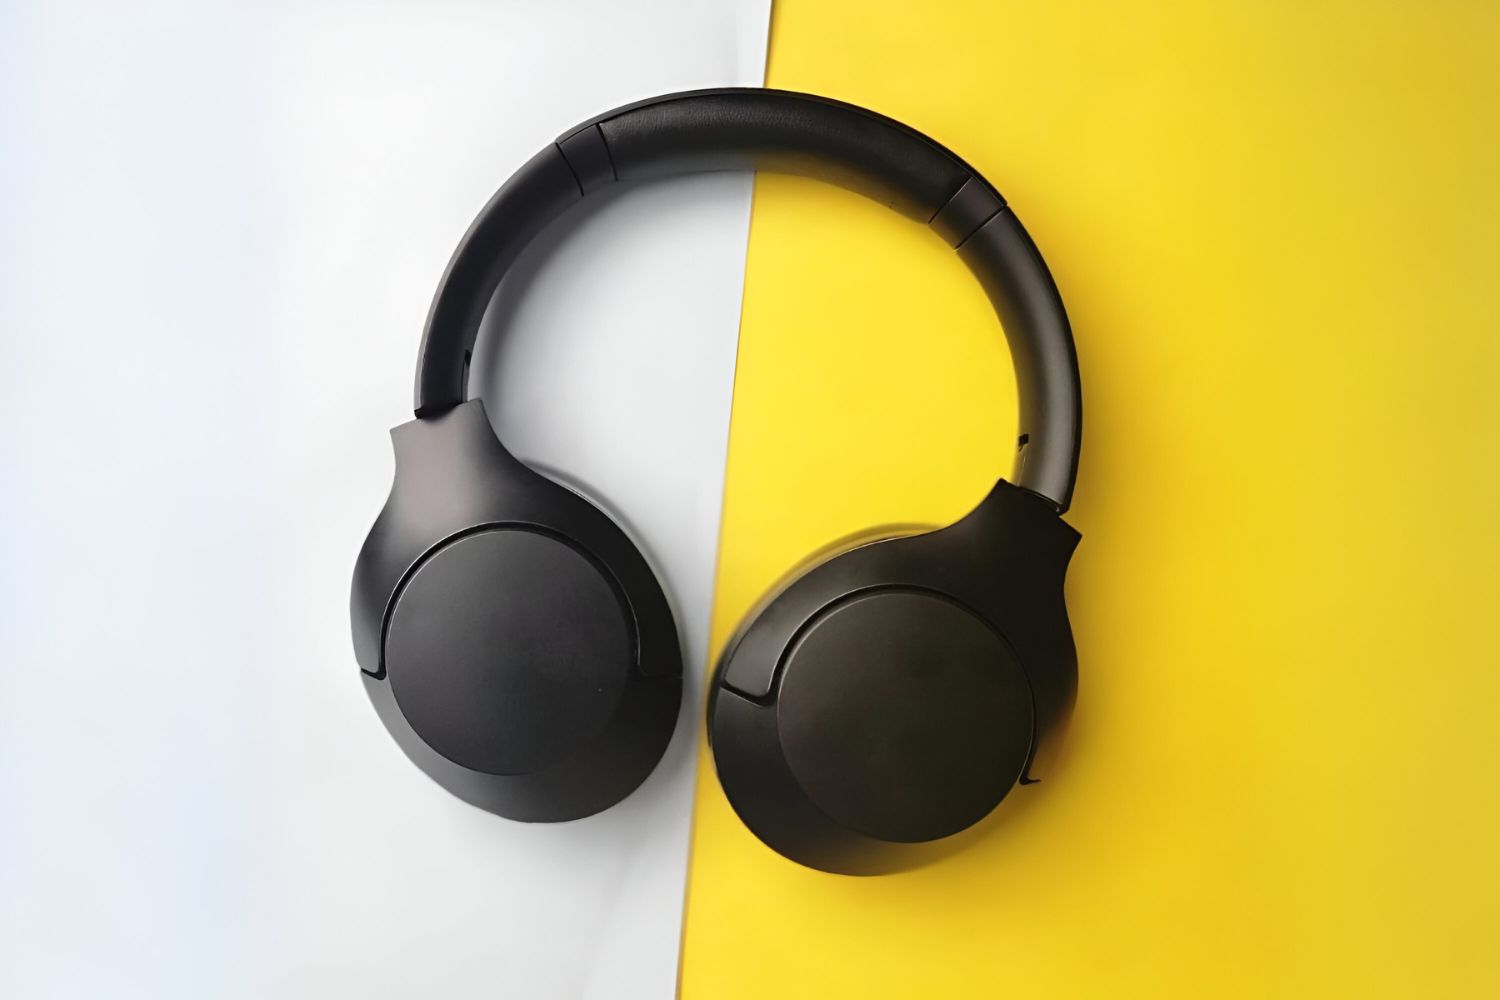 How To Change The Battery On Philips Noise Cancelling Headphones